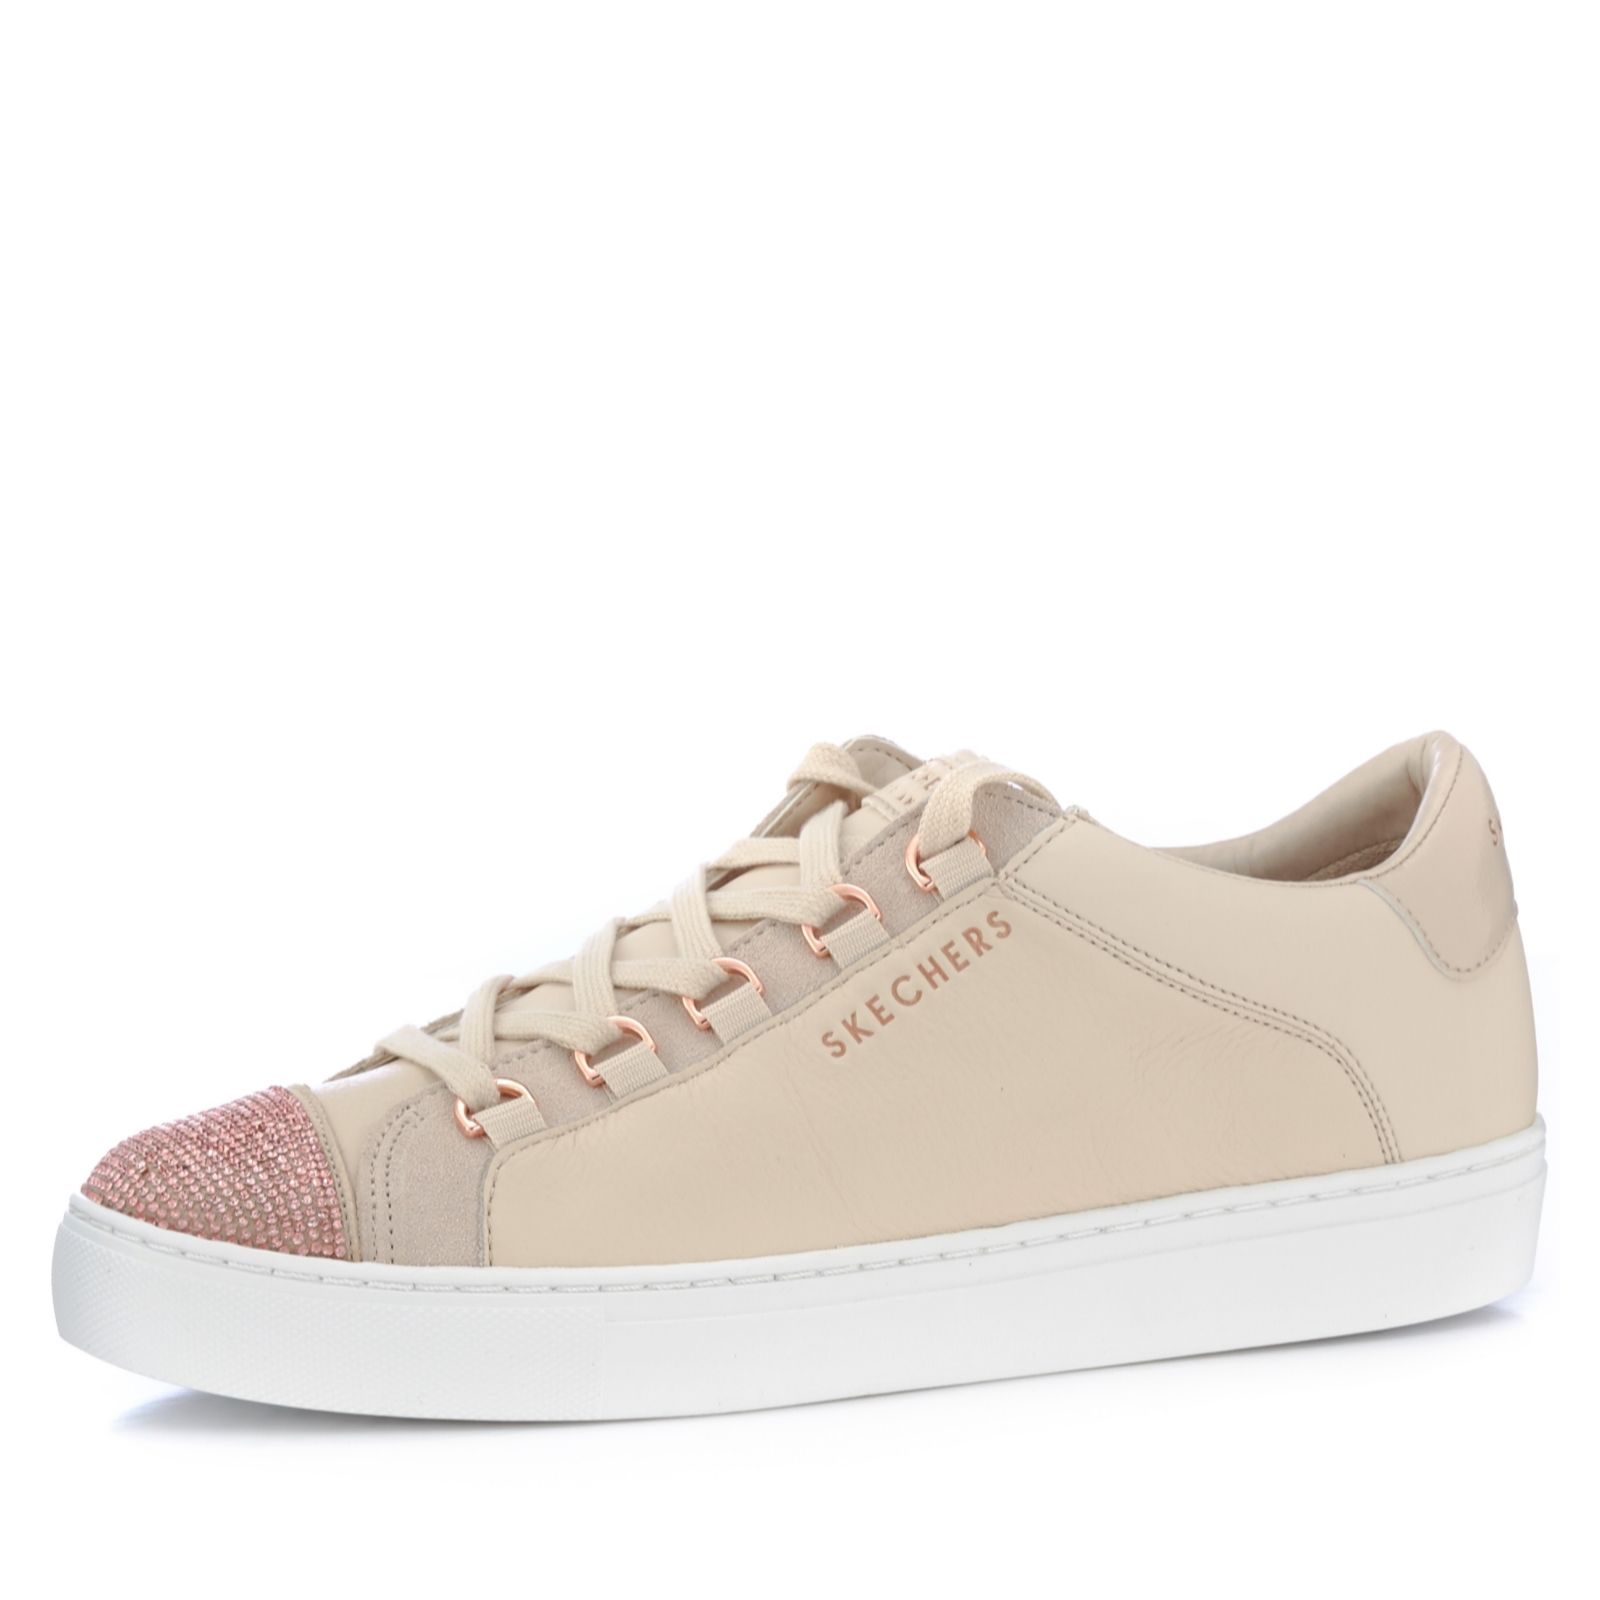 skechers street suede and sparkle lace up trainer